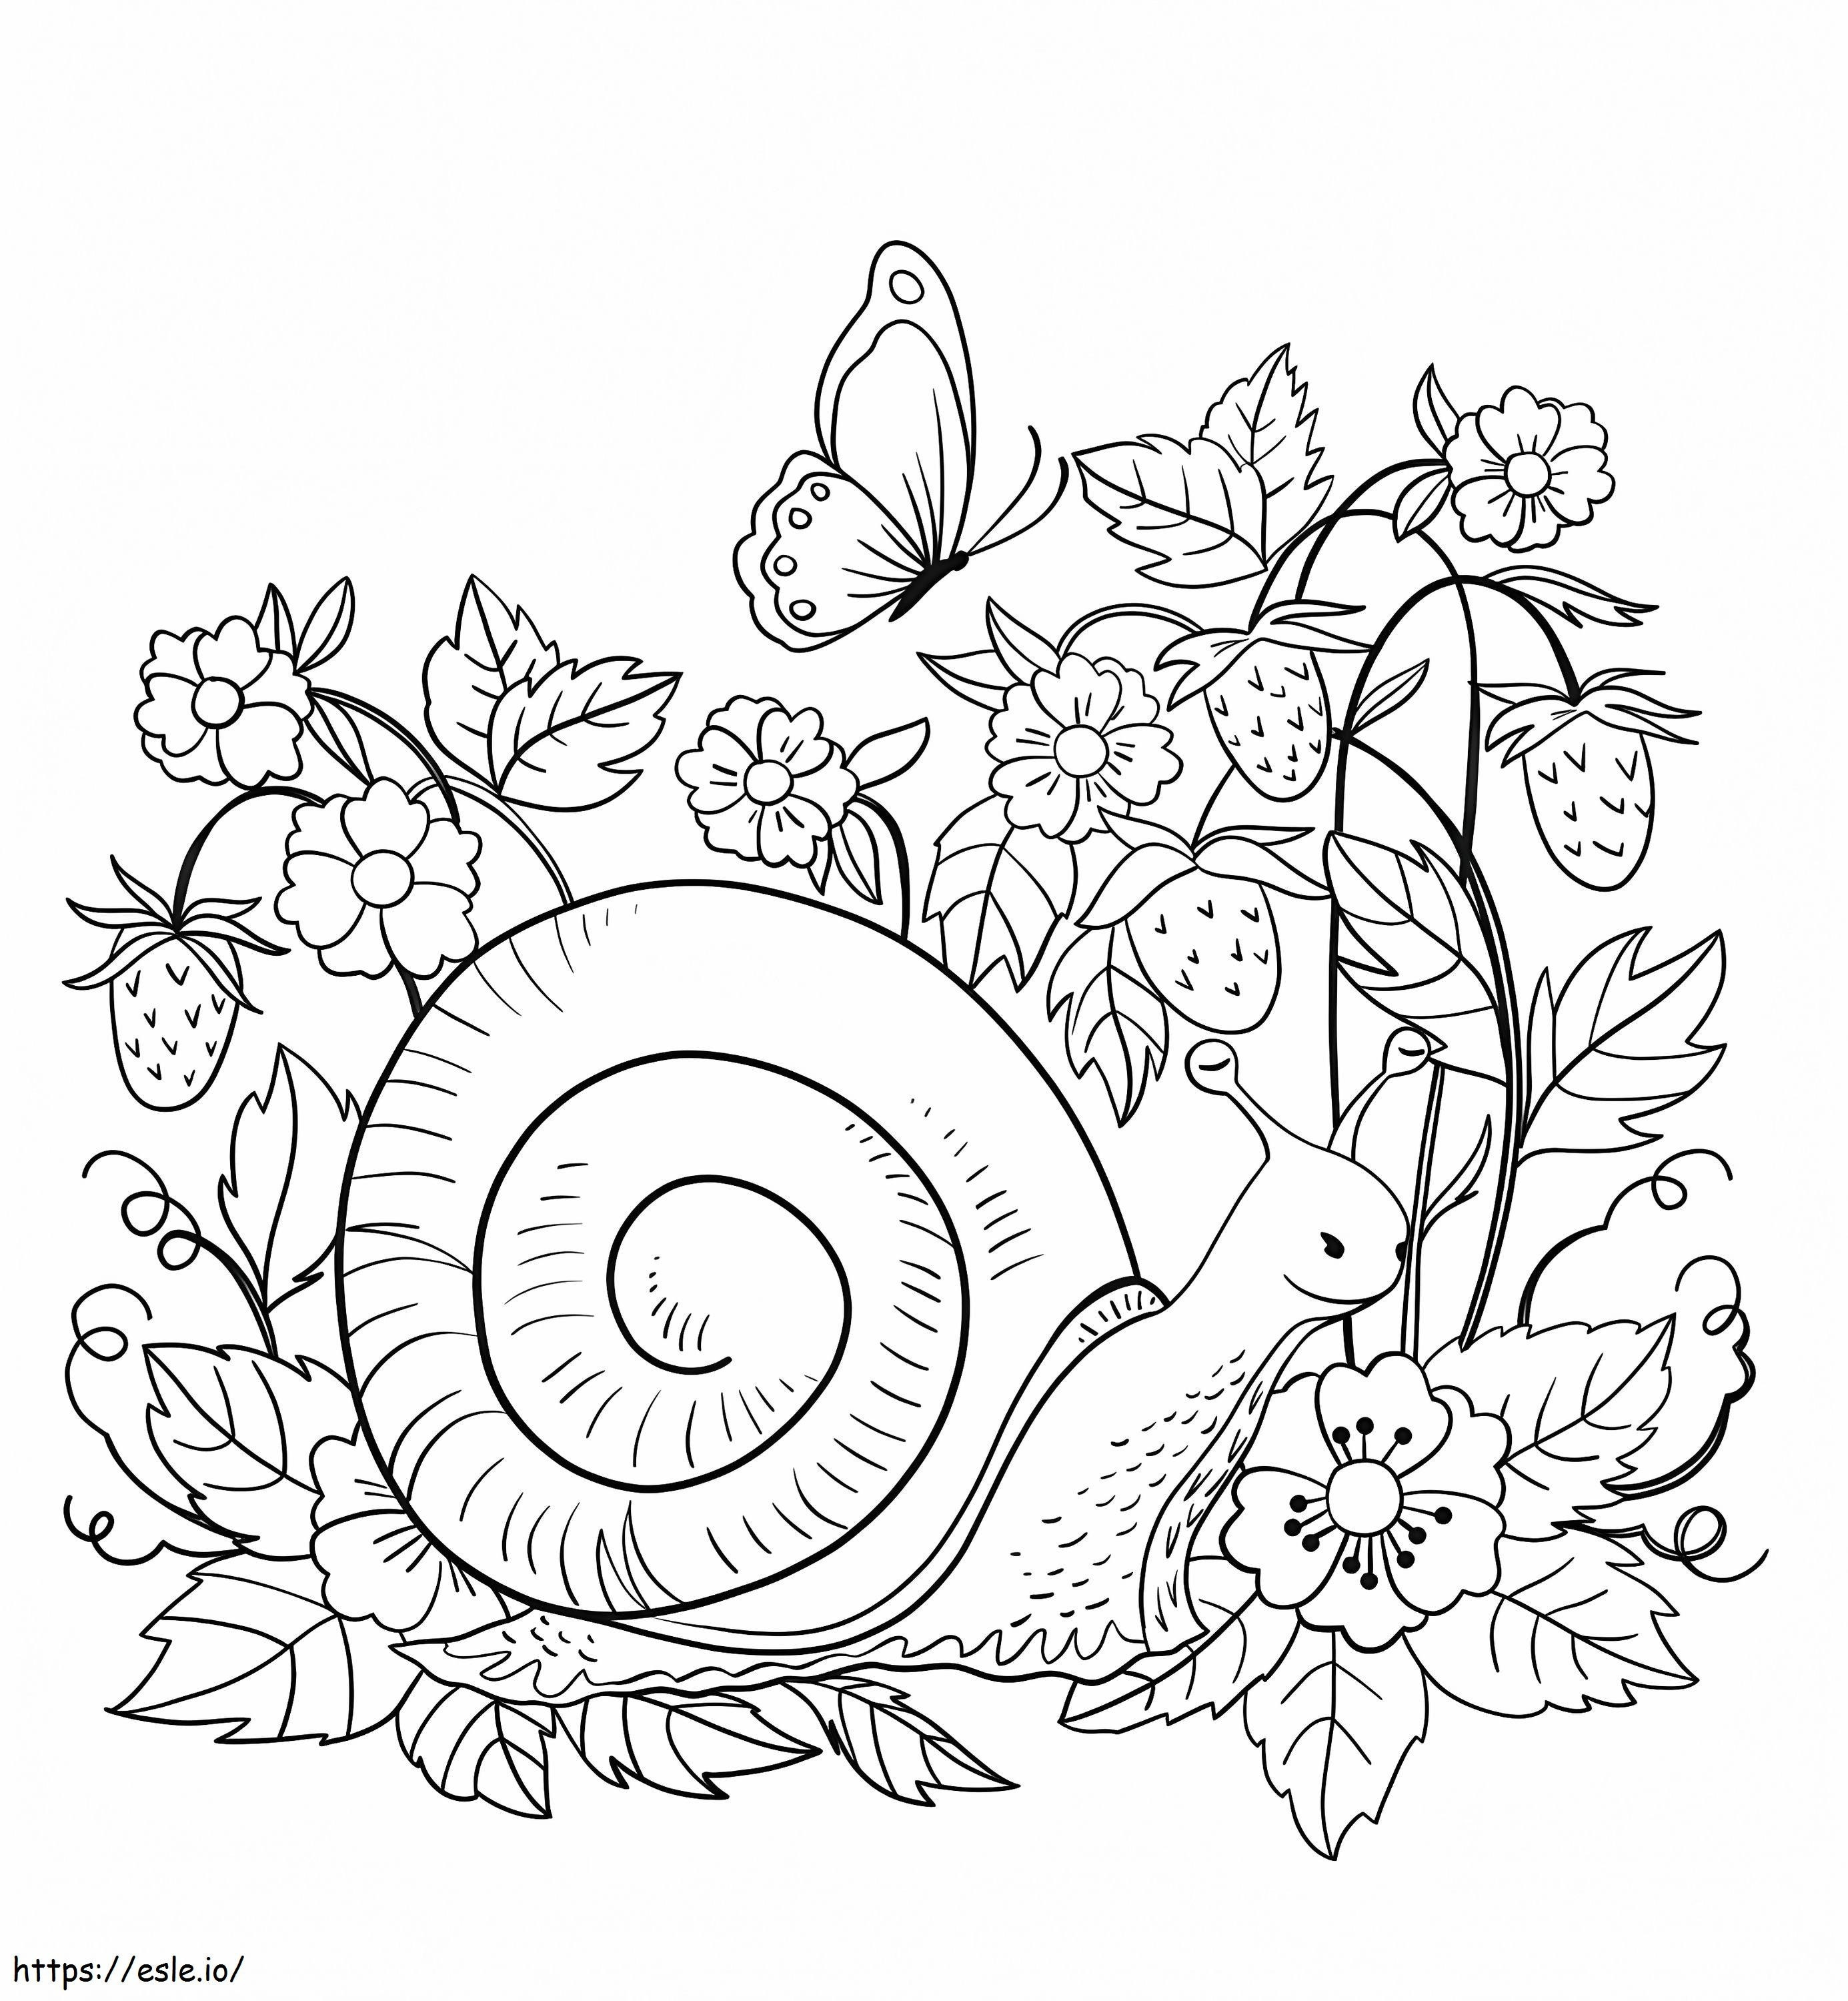 1560157498 Snail A4 coloring page